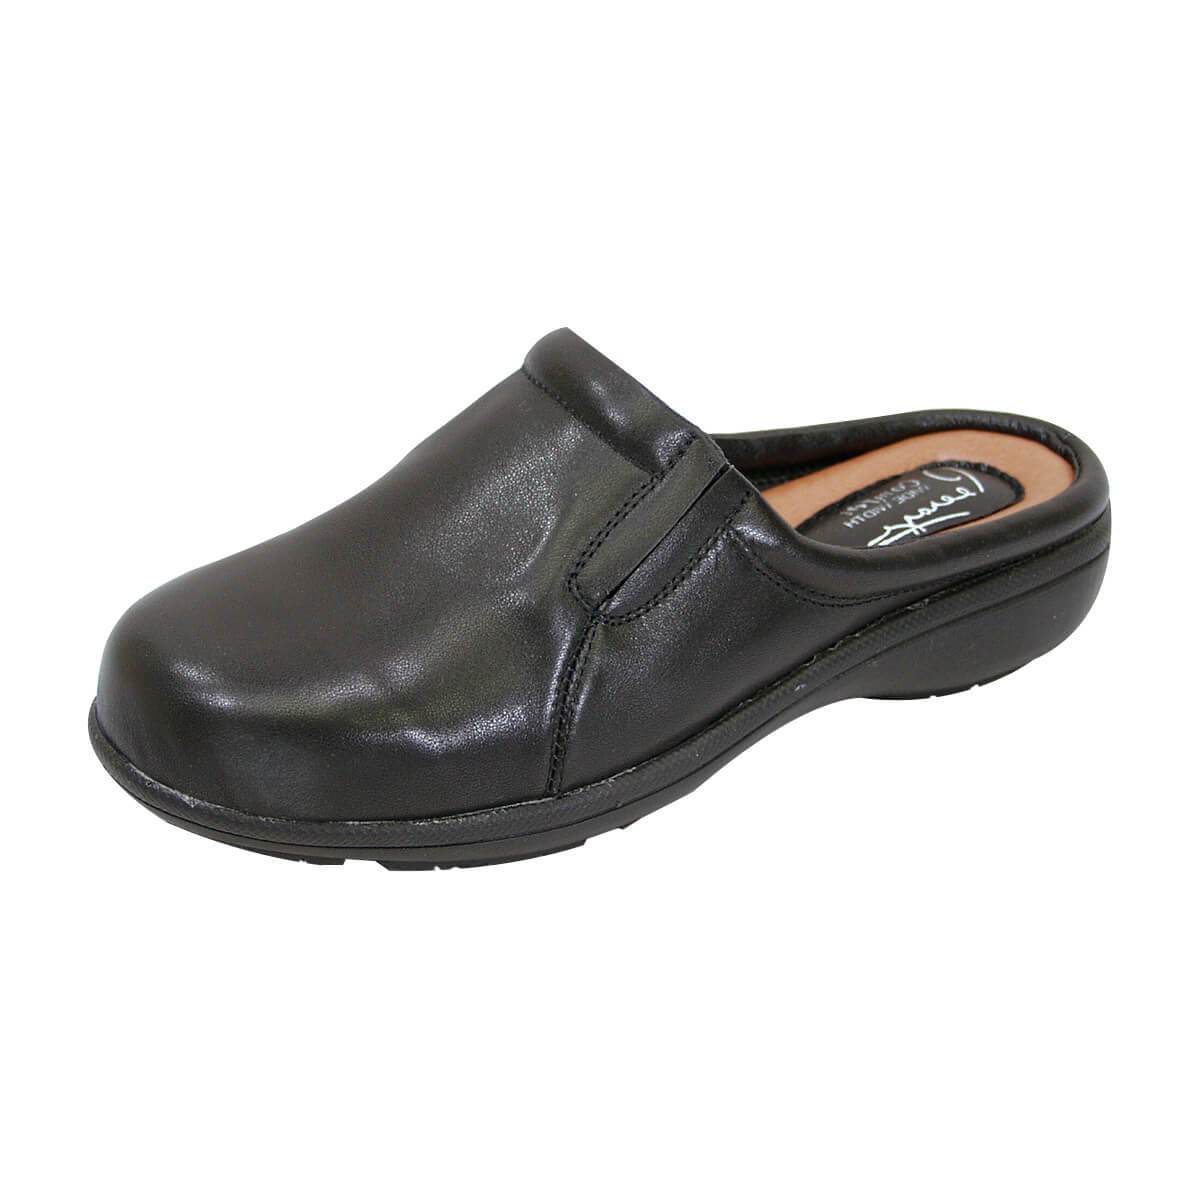 PEERAGE Mary Women's Wide Width Leather Clogs